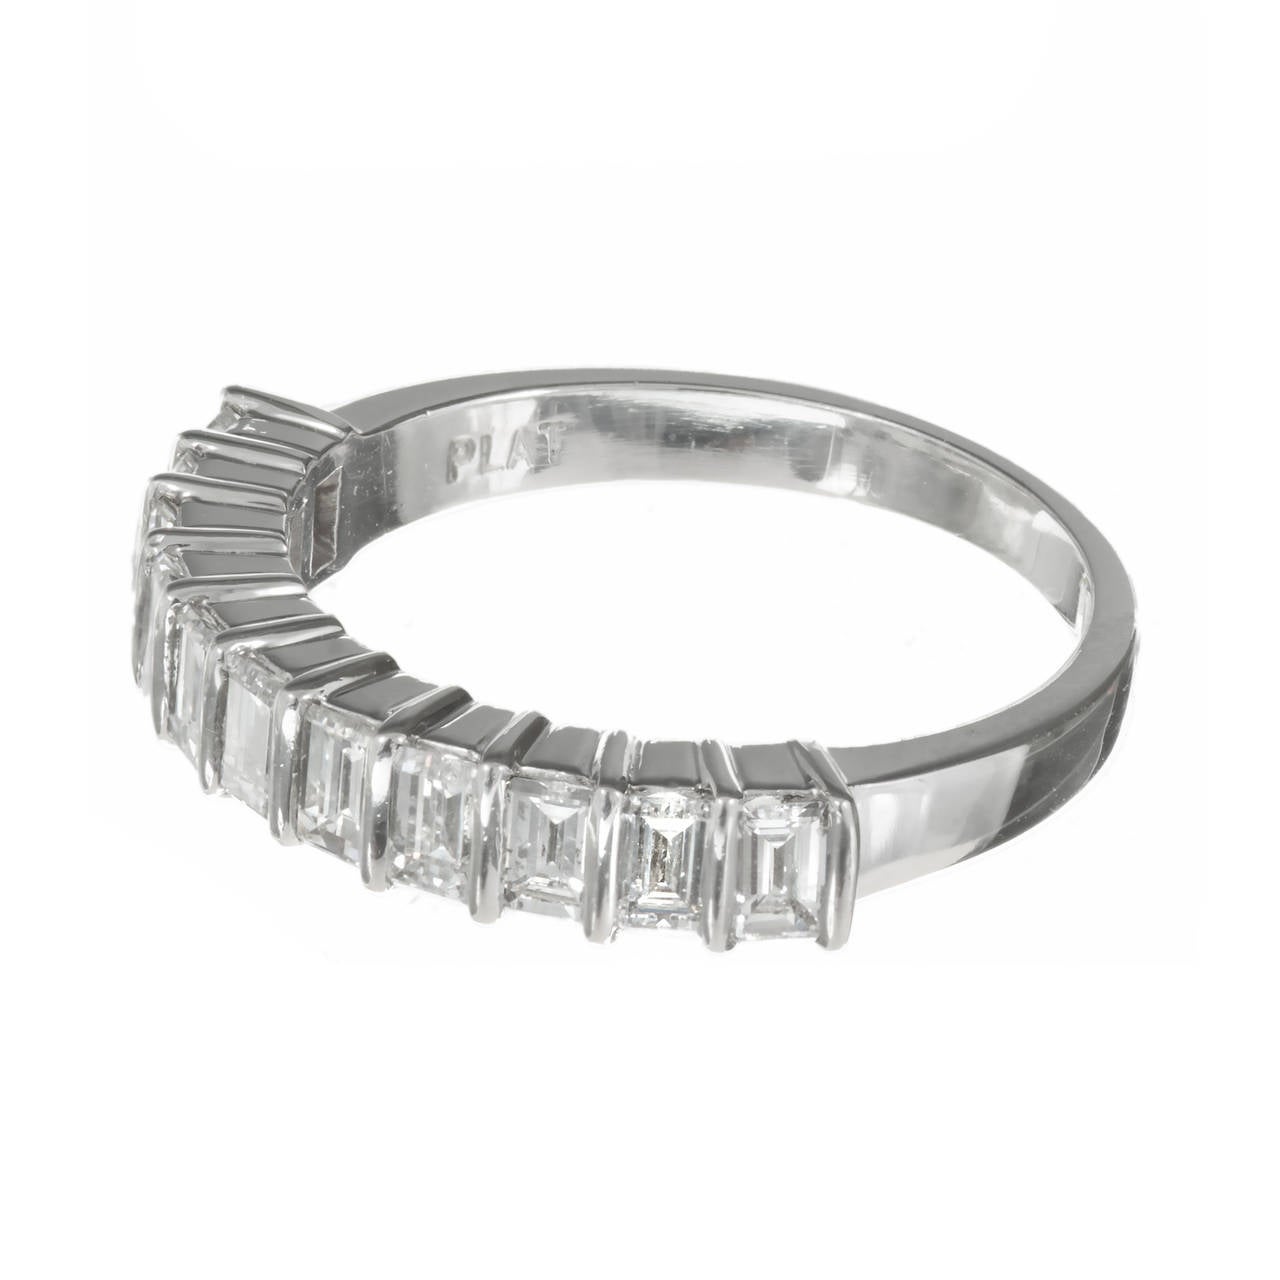 Exceptional 1960’s bar set 11 Emerald cut diamond wedding ring. Exceptional condition, shows little to no wear. Deep old style stamps.

11 Emerald cut diamonds, approx. total weight 1.00cts, F, VS1
Platinum
4.4 grams
Tested: Platinum
Stamped: